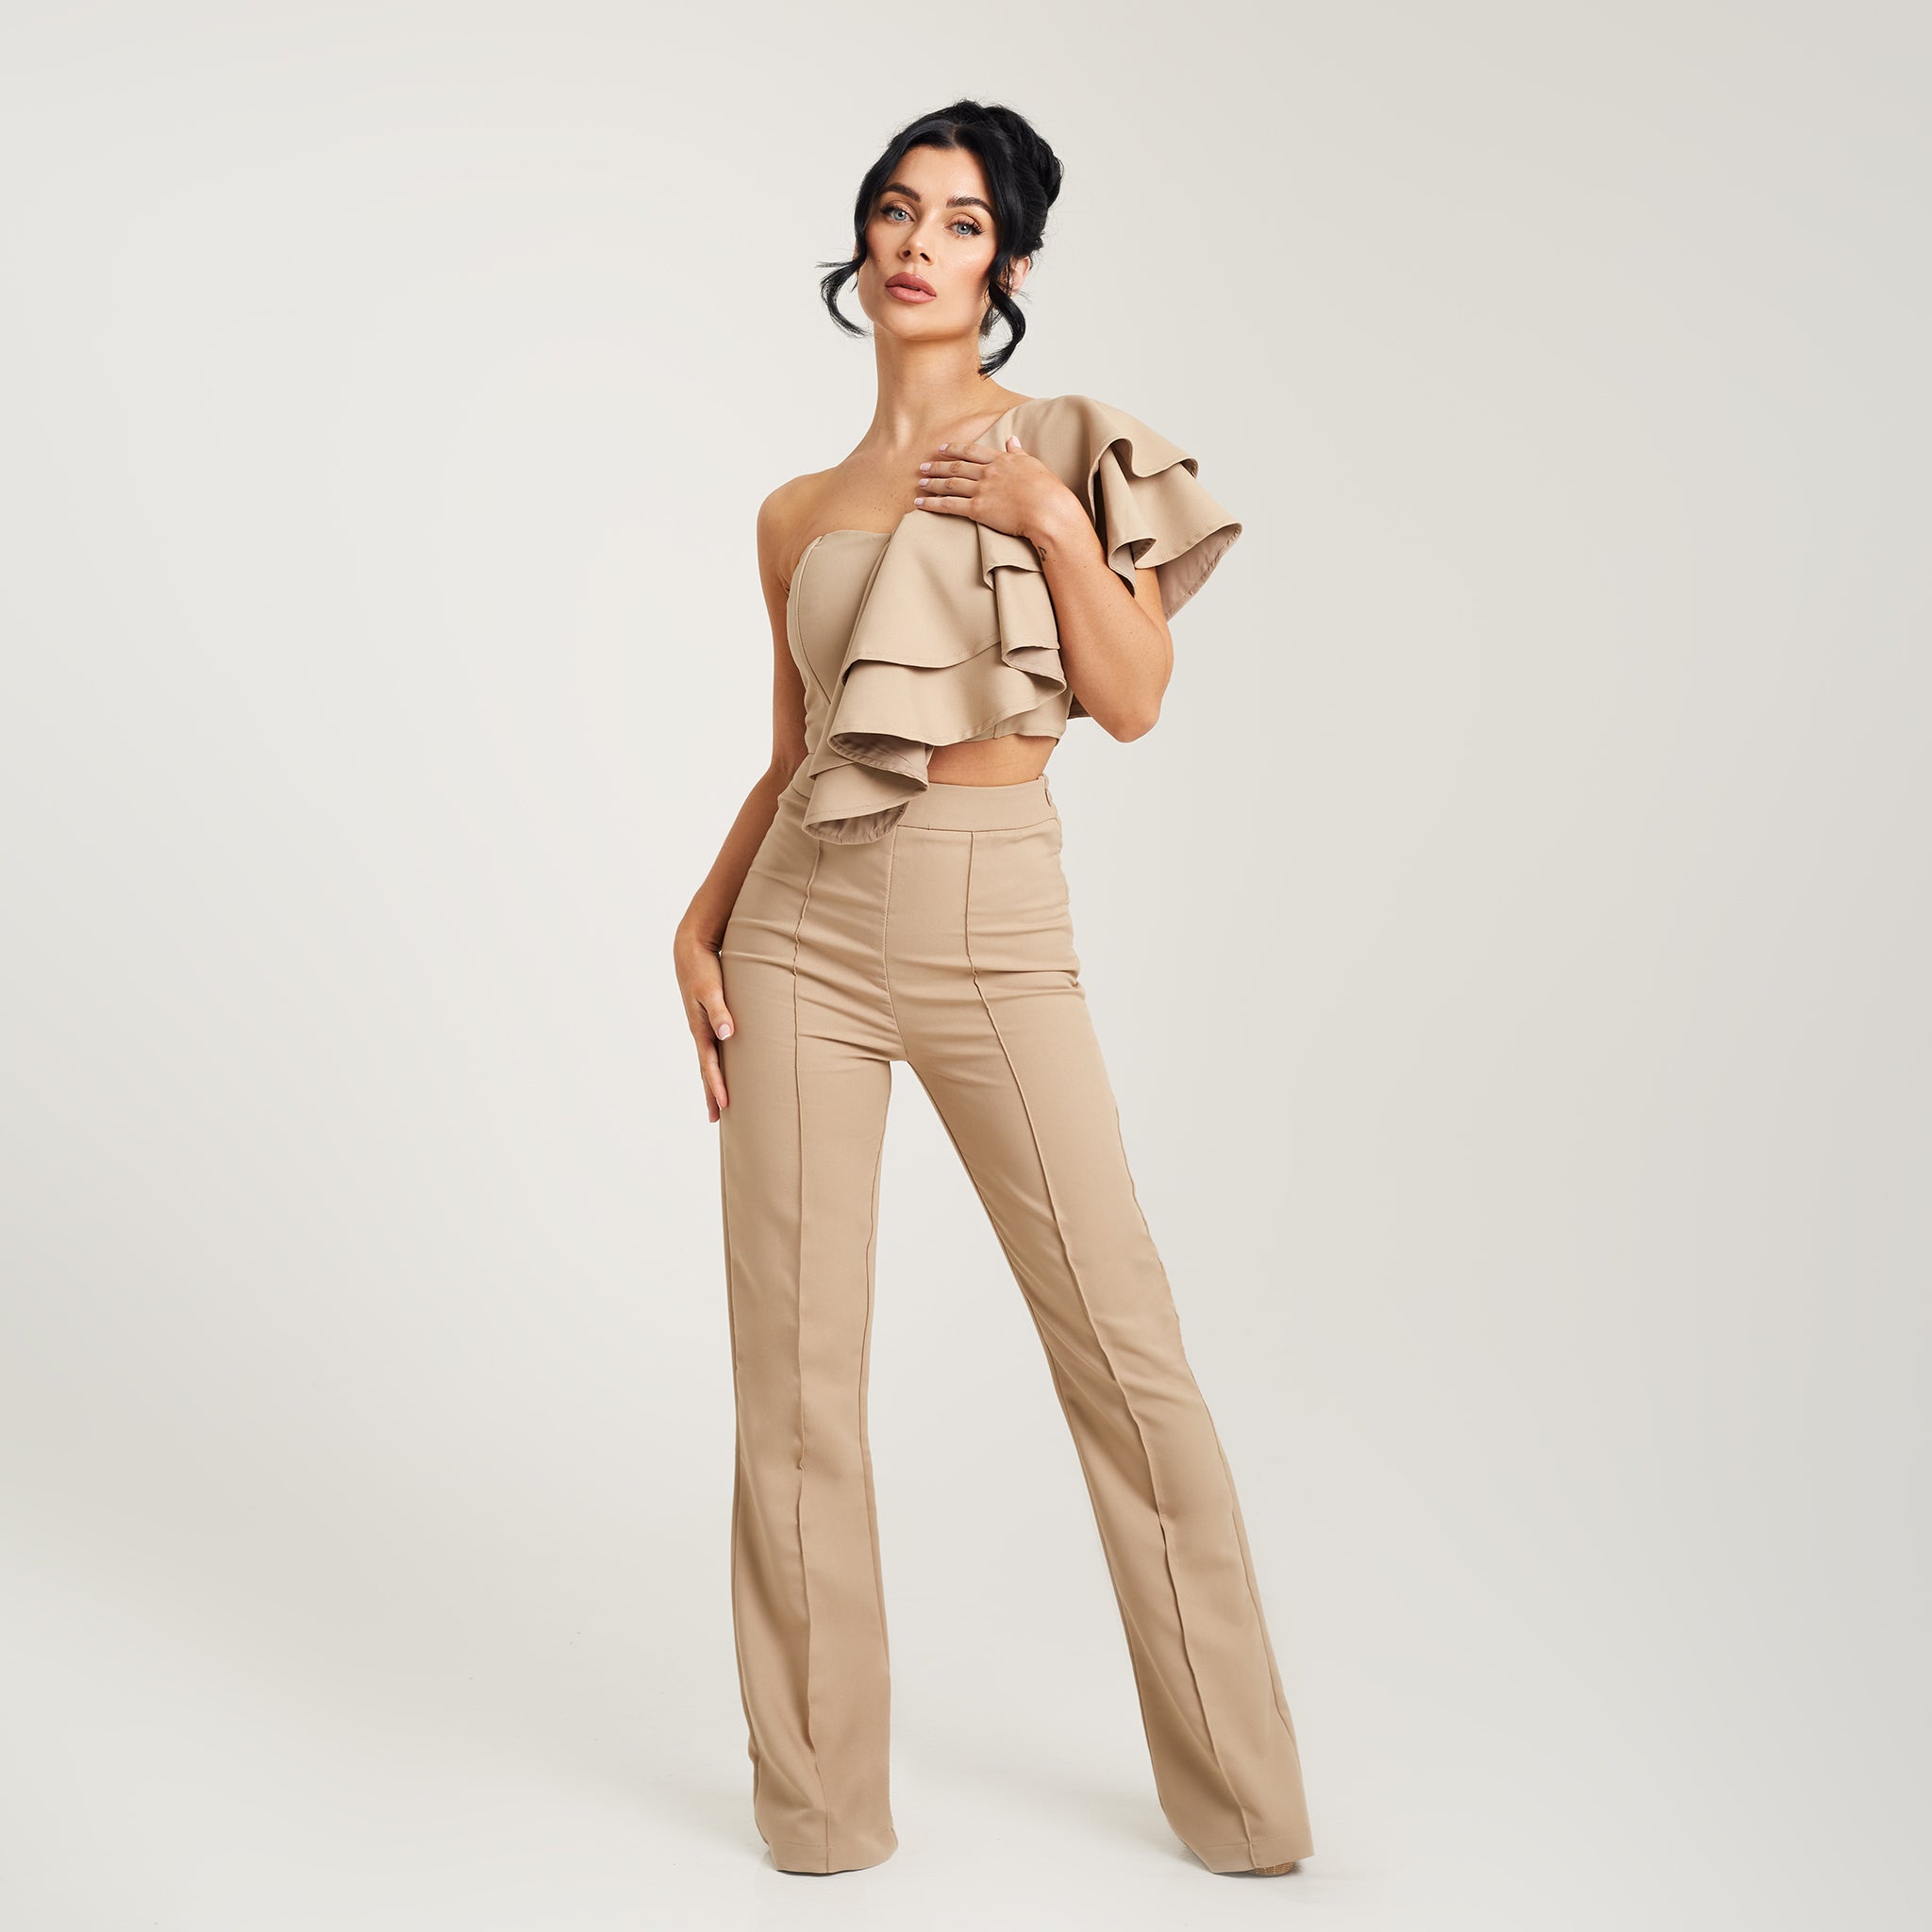  pair of women's high-waisted, wide-leg suit trousers in a soft beige color. The trousers feature a tailored fit and sit comfortably at the waist, accentuating the feminine silhouette. The wide legs gracefully flow down, creating a sophisticated and elegant look. The neutral beige tone adds a timeless touch to the ensemble, making these trousers versatile for various occasions. Whether paired with a blouse for a professional setting or dressed down with a casual top, these trousers offer style and comfort